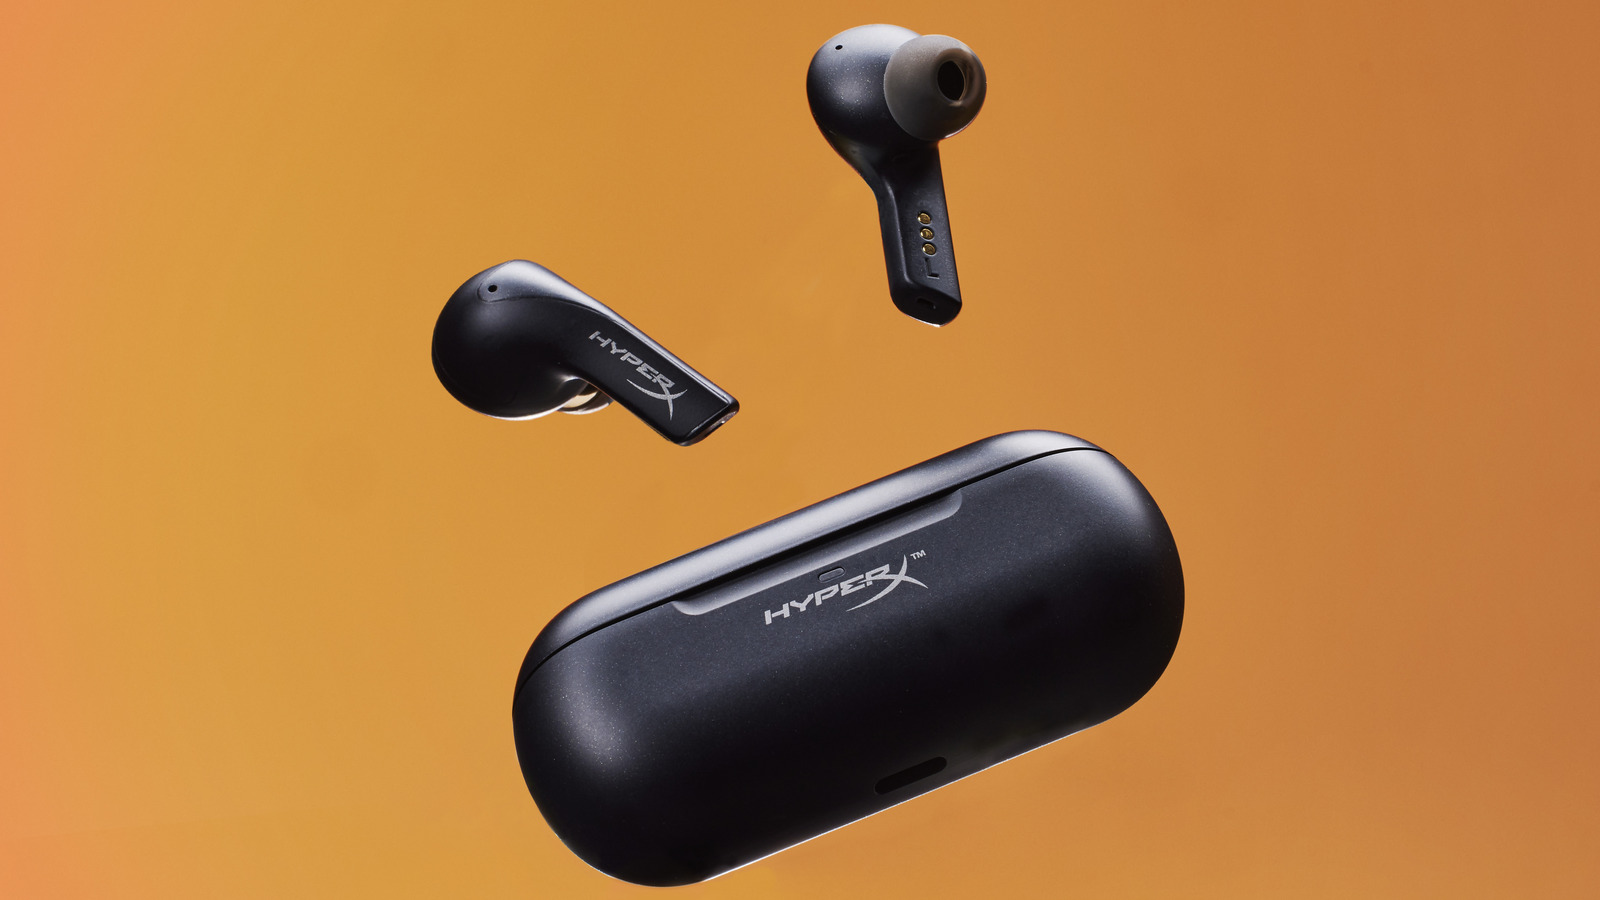 Wireless Cloud Delivers Buds MIX HyperX True First Headset With Its